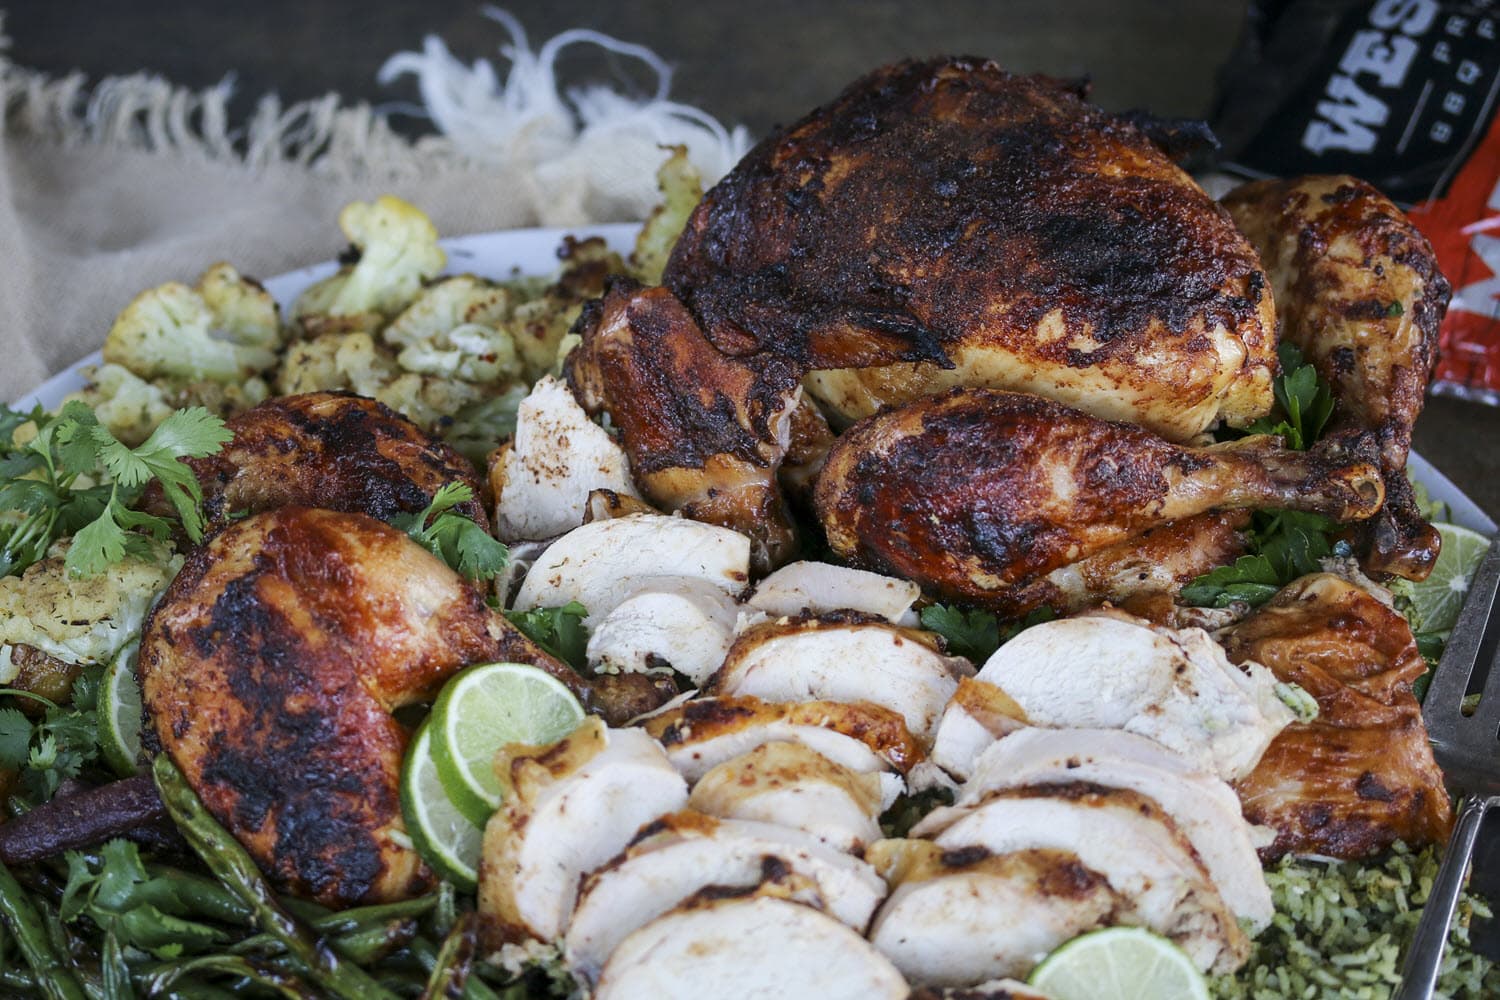 Sliced and whole rotisserie chicken plated with vegetables